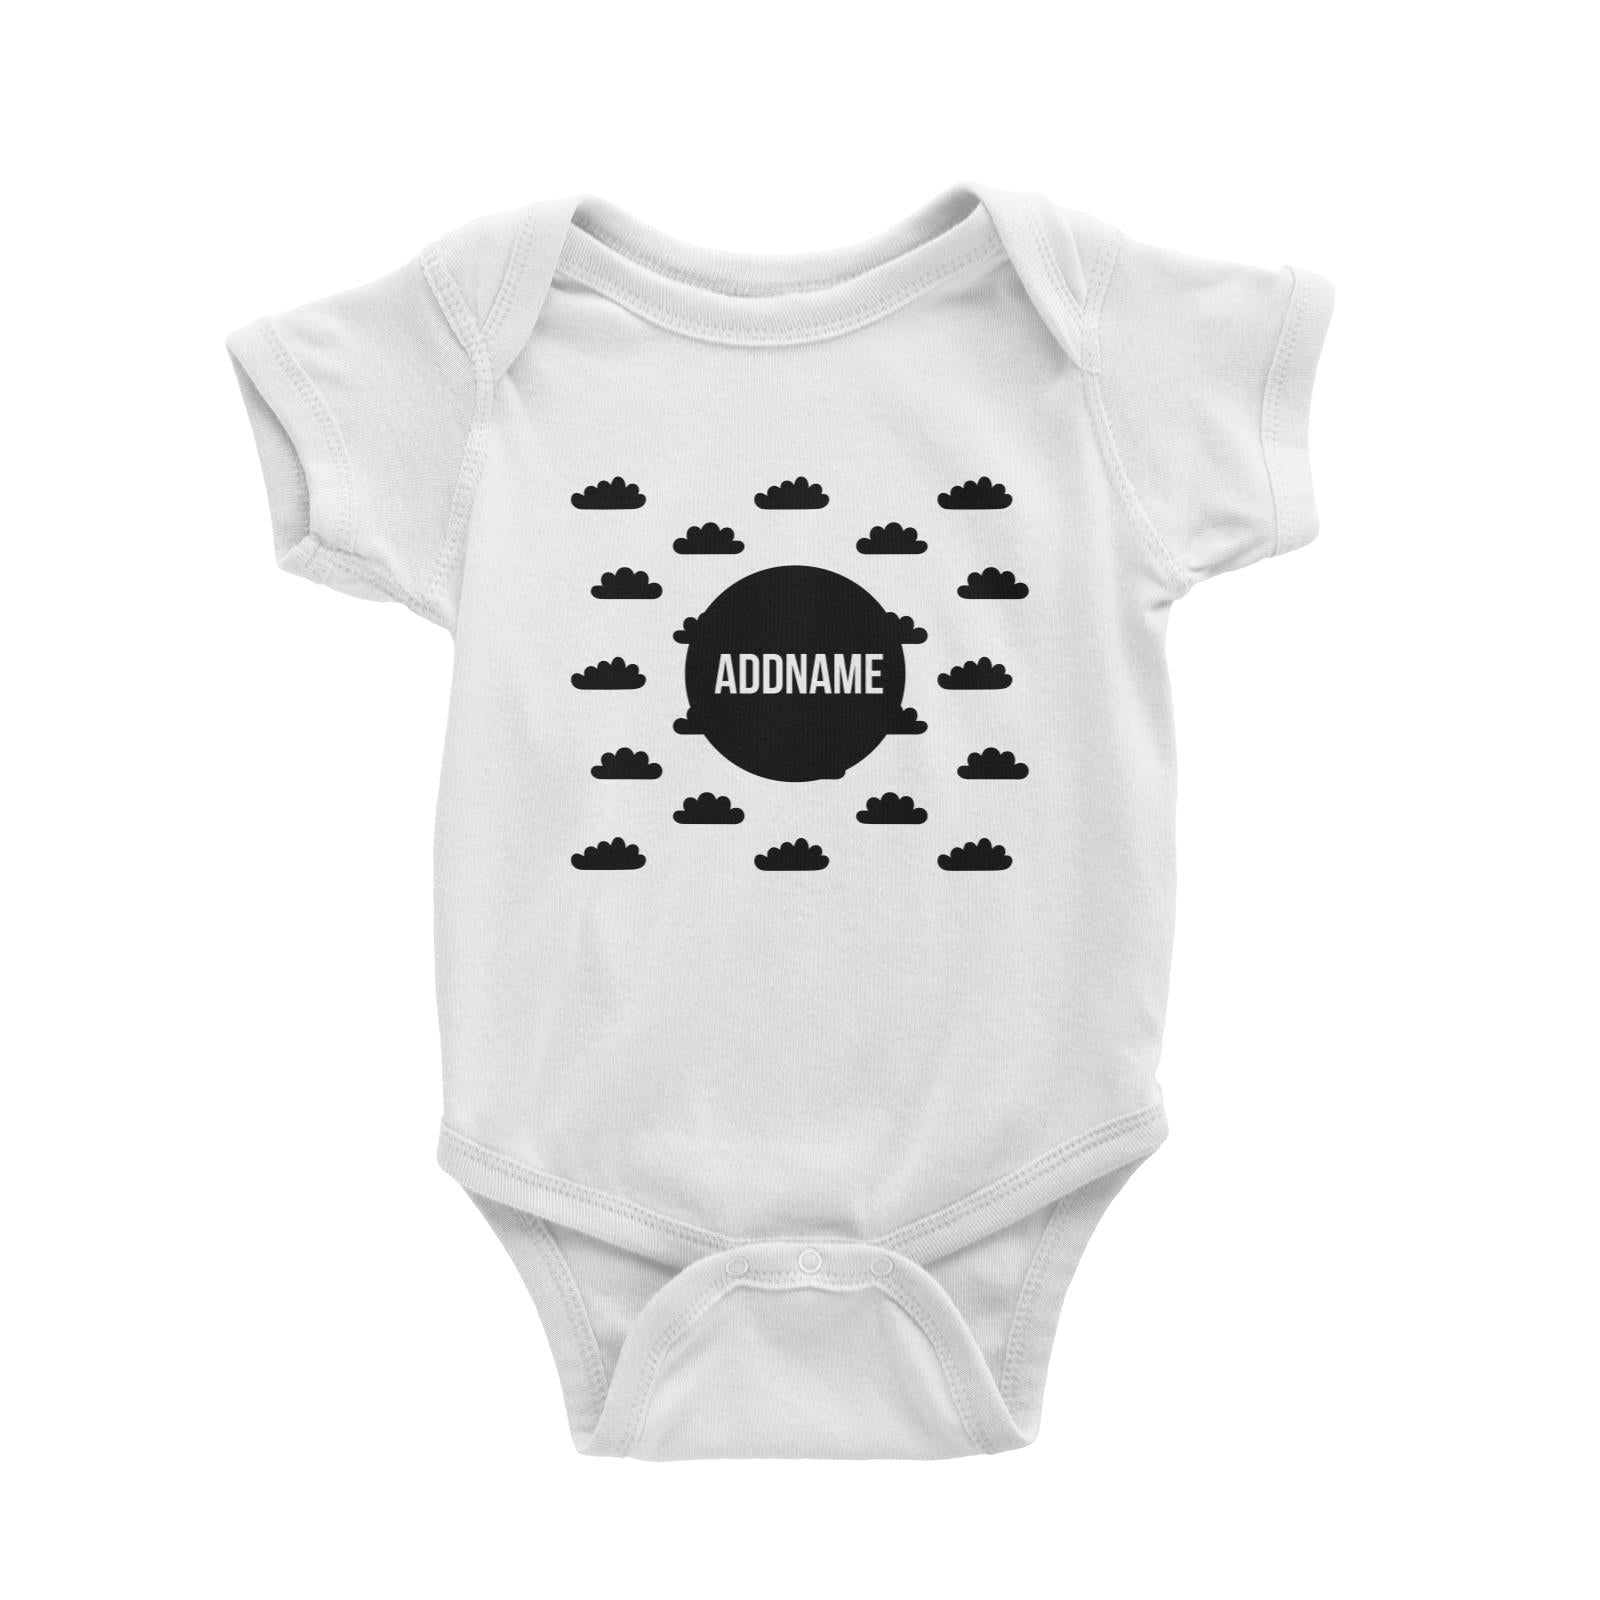 Monochrome Black Circle with Clouds Addname Baby Romper